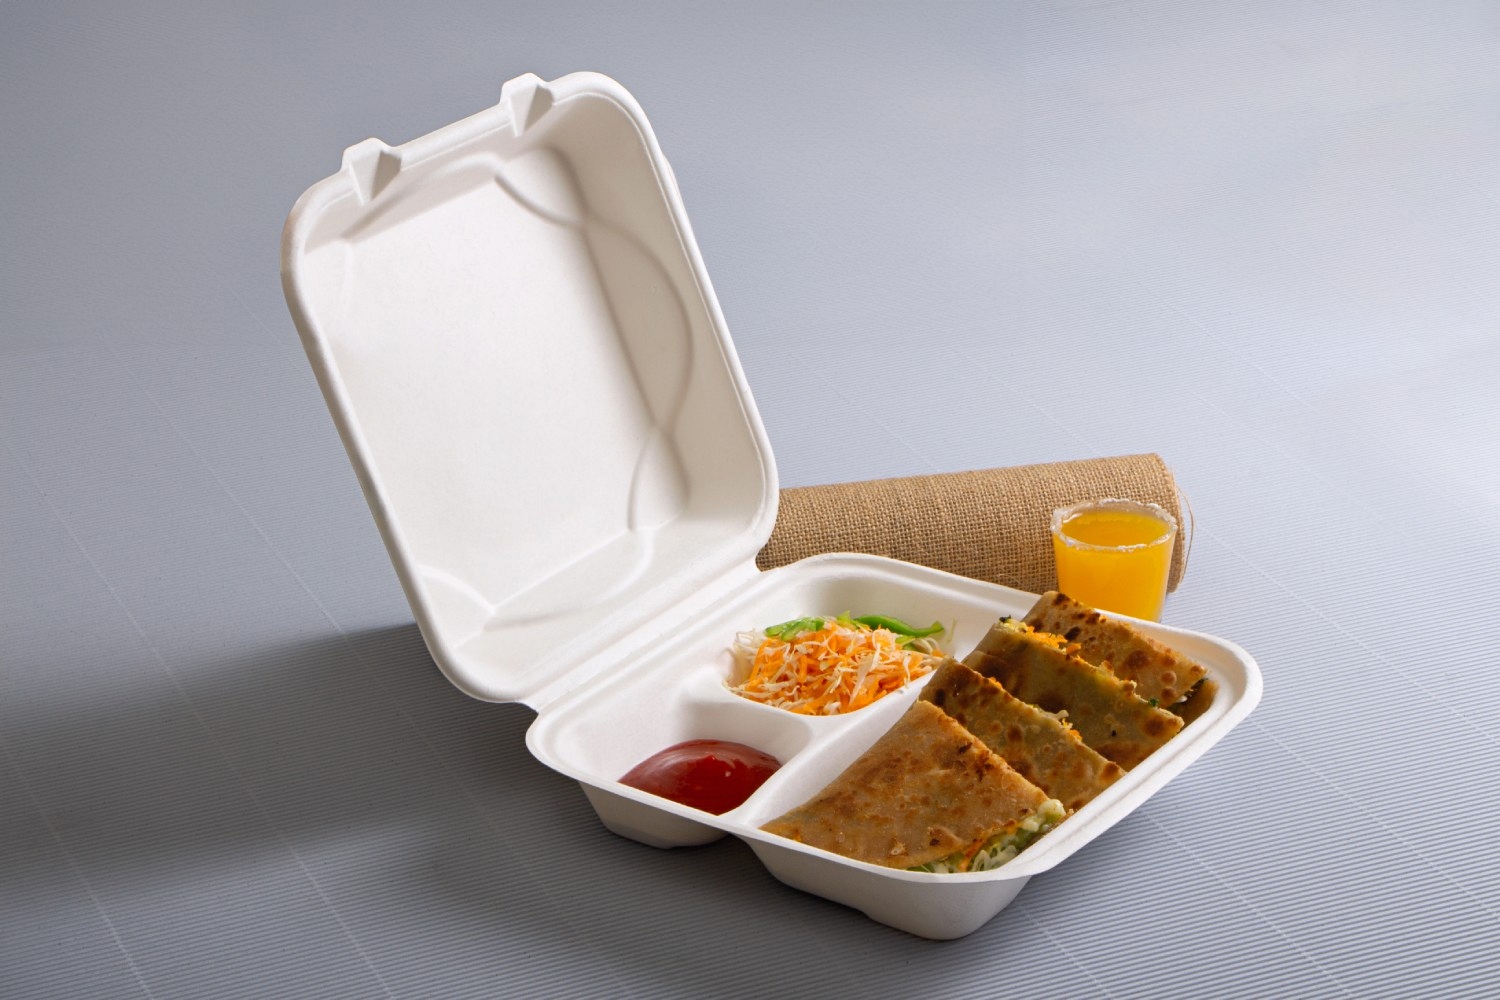 https://www.ecolates.com/wp-content/uploads/2023/02/3-compartments-9-inch-sugarcane-bagasse-takeout-box-with-hinged-lid-container.jpg